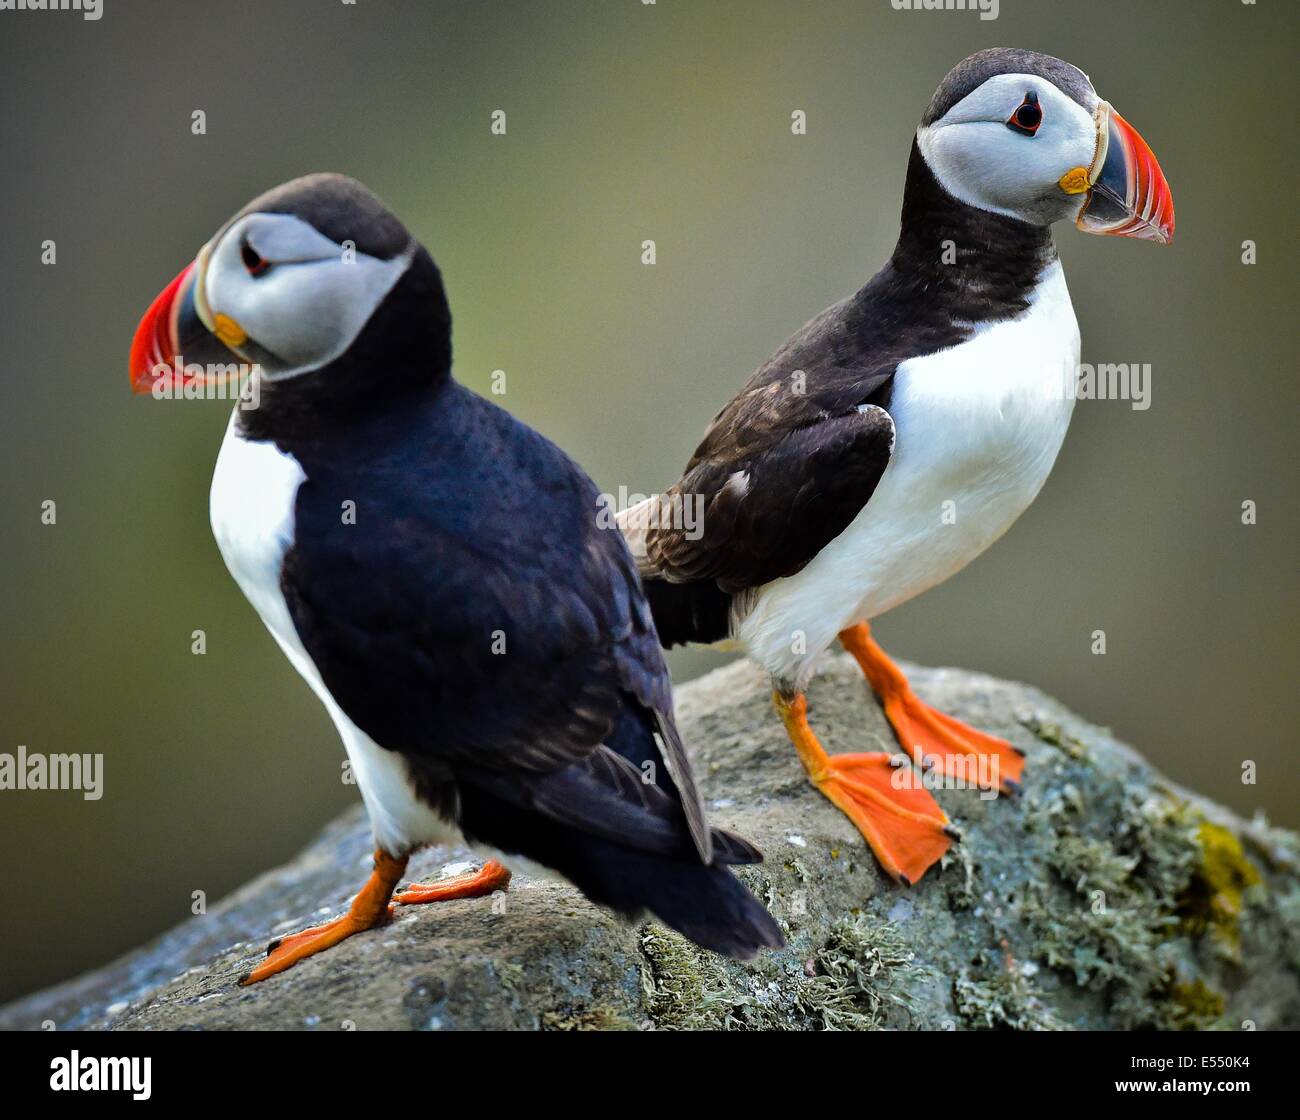 Alesund, Norway. 12th July, 2014. Two Atlantic puffins (Fratercula arctica) is pictured on Norwegian island Runde (Goksøyr) near Alesund, Norway, 12 July 2014. The Atlantic puffin is about as tall as a domestic pigeon. Photo: Patrick Pleul/dpa/Alamy Live News Stock Photo